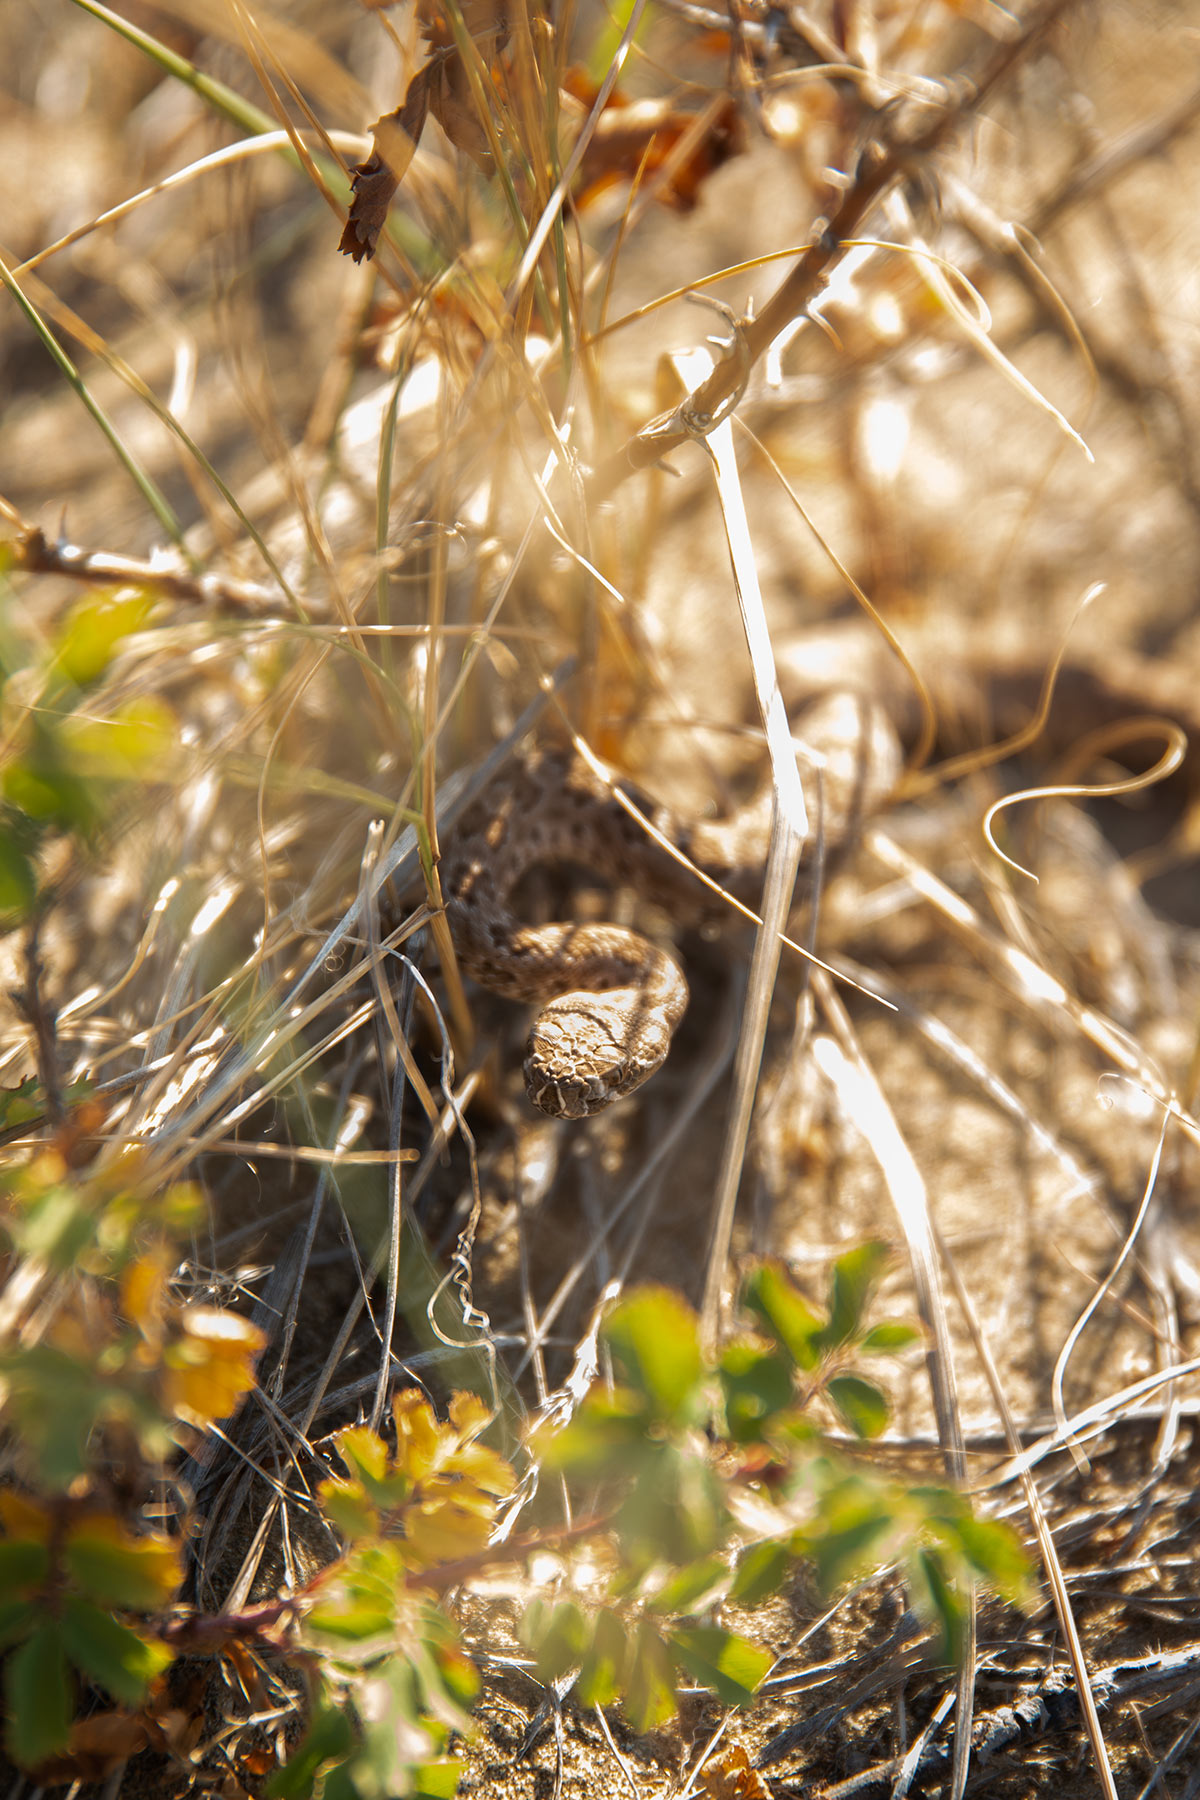 Close-up photo of a prairie rattlesnake hiding in tall grass